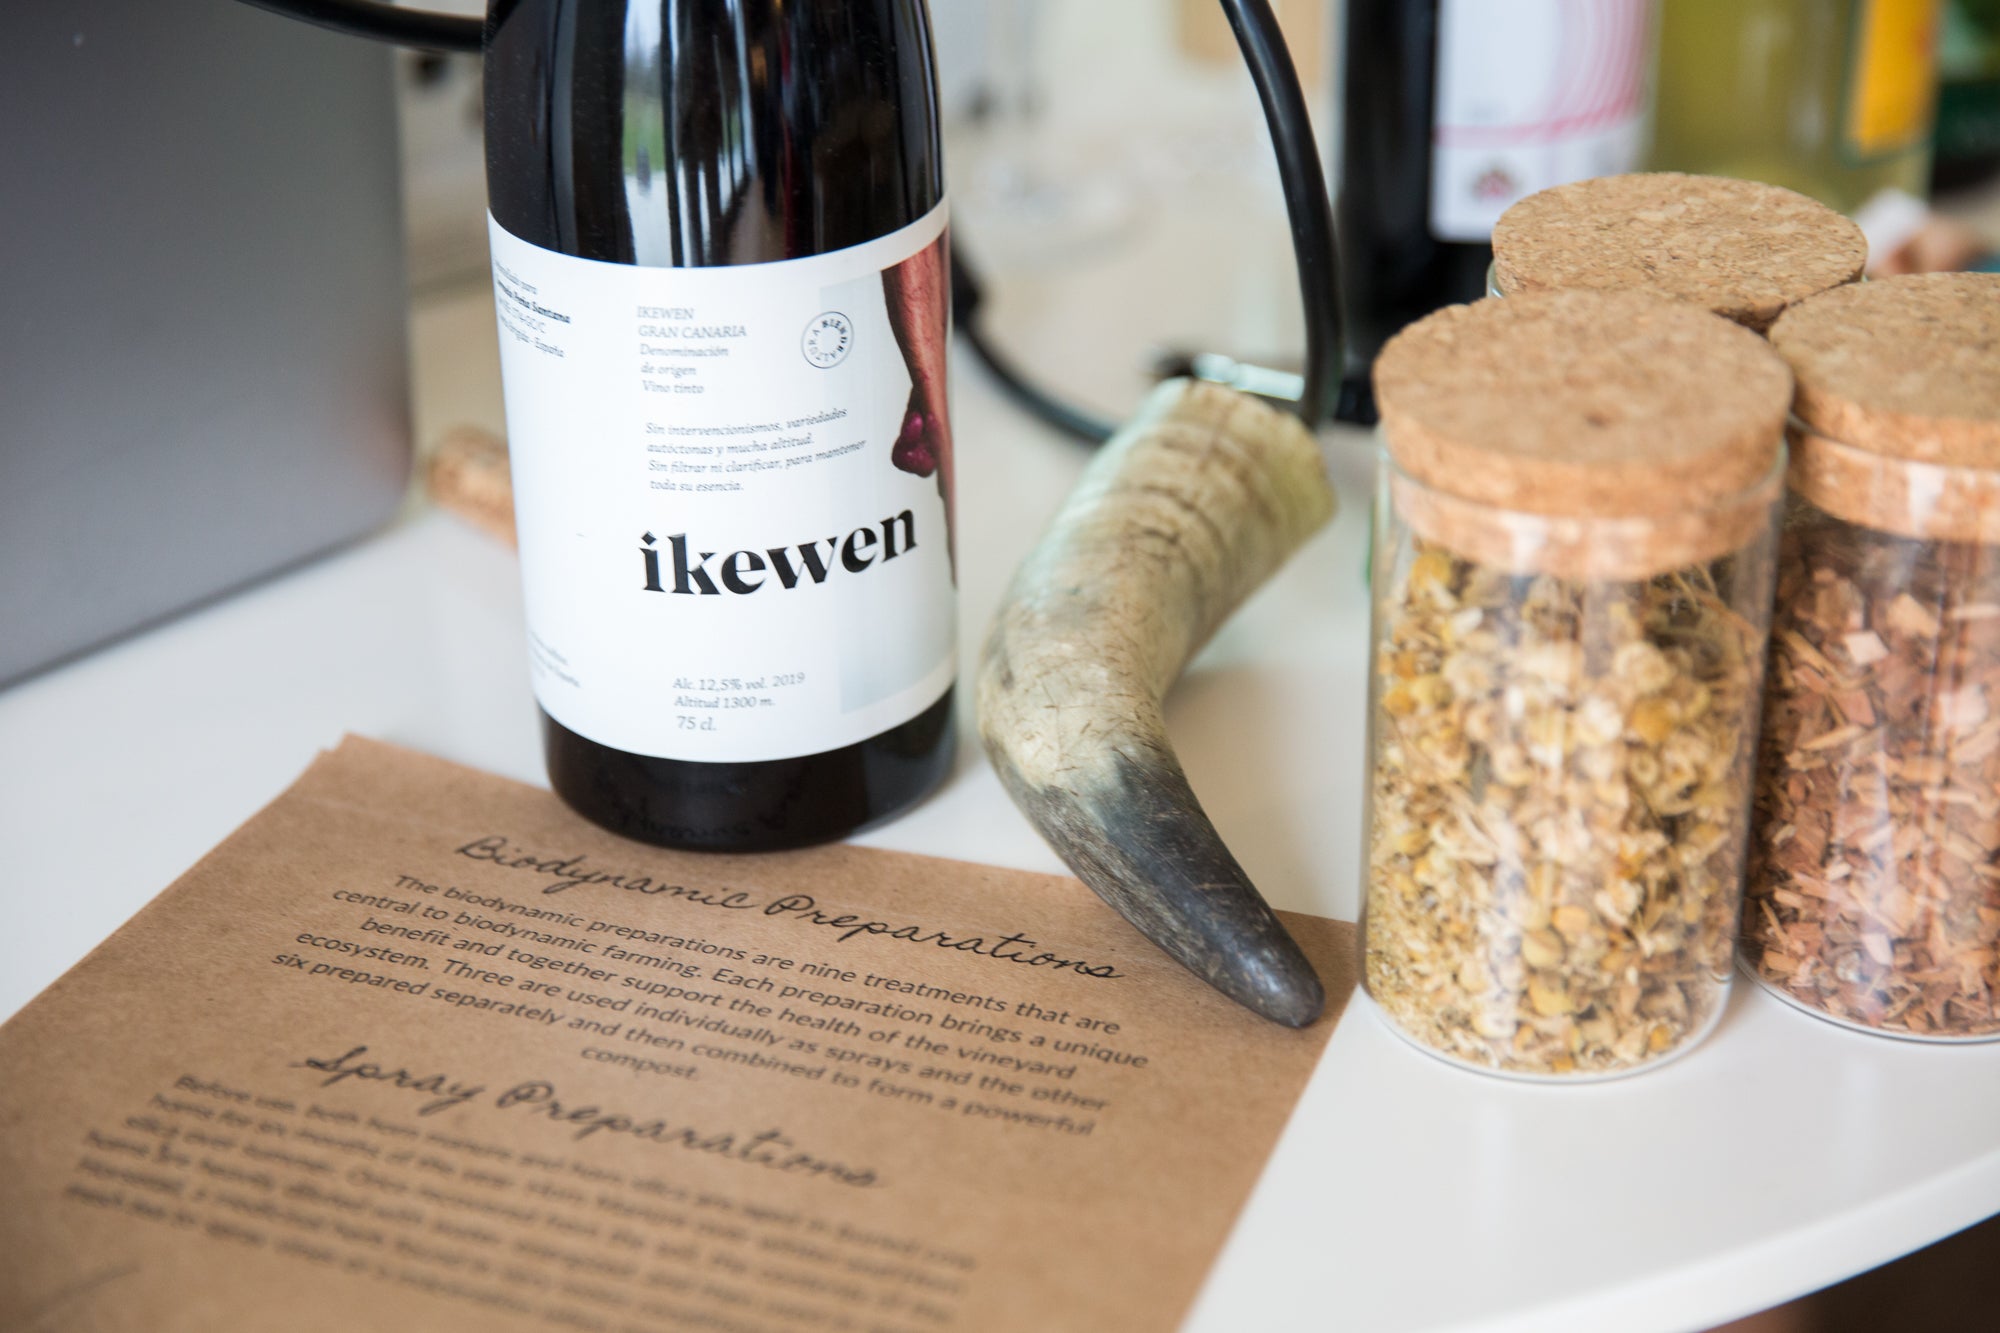 A selection of materials used to make biodynamic preparations and a bottle of natural wine